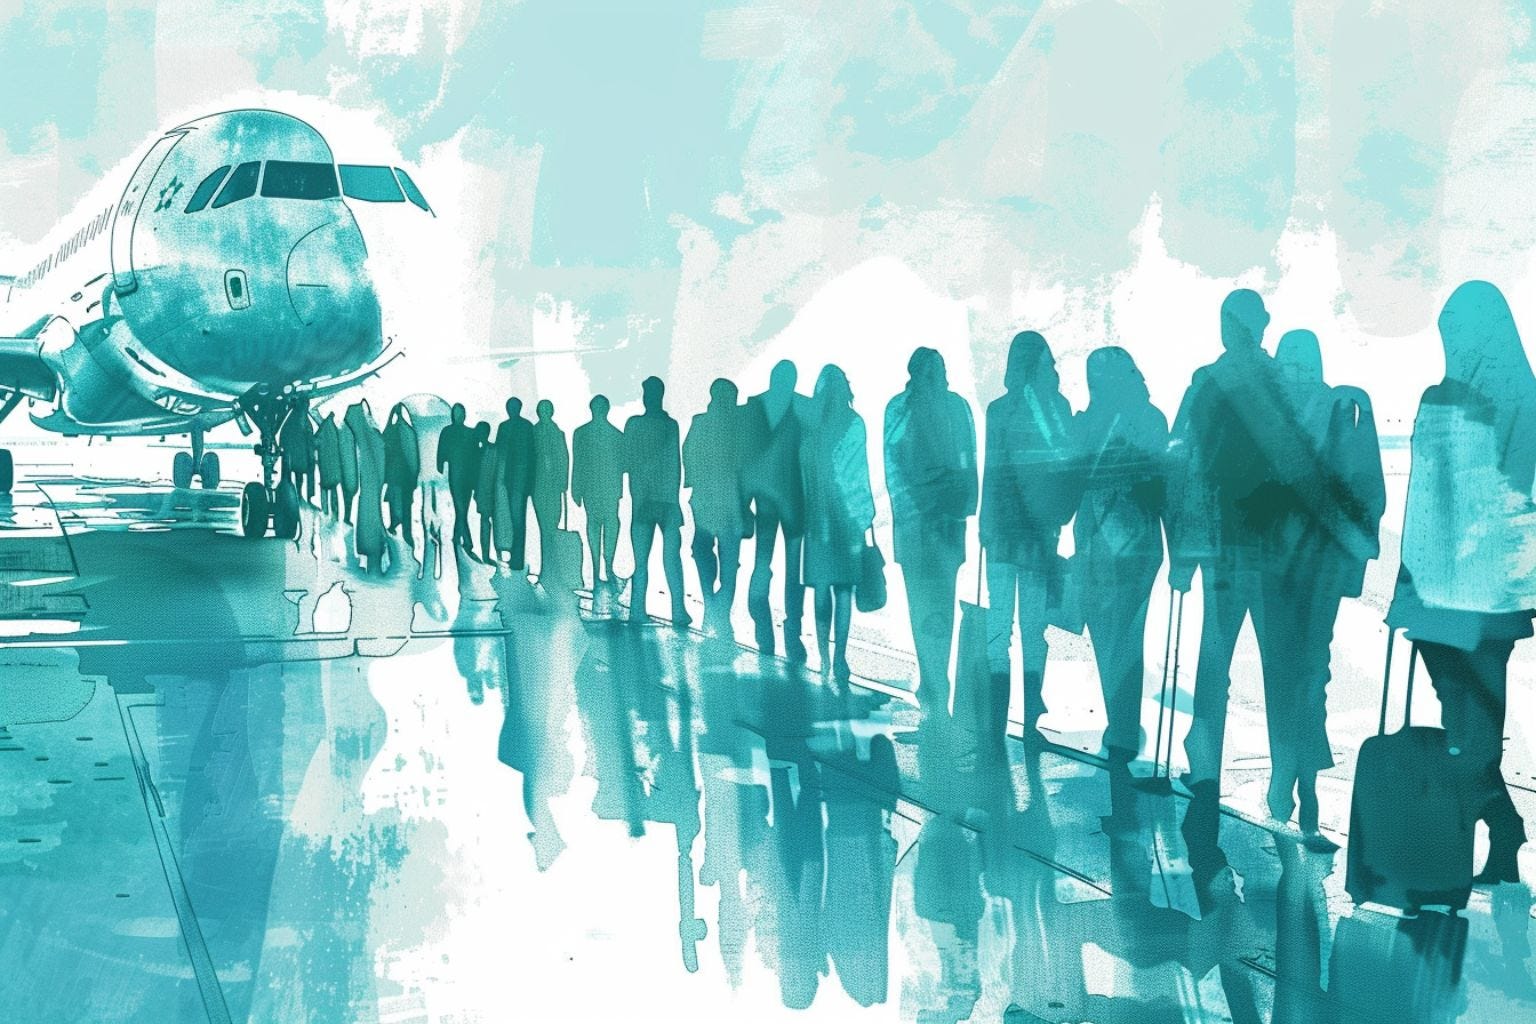 Airline passengers are cutting in line when they board. It’s time to s